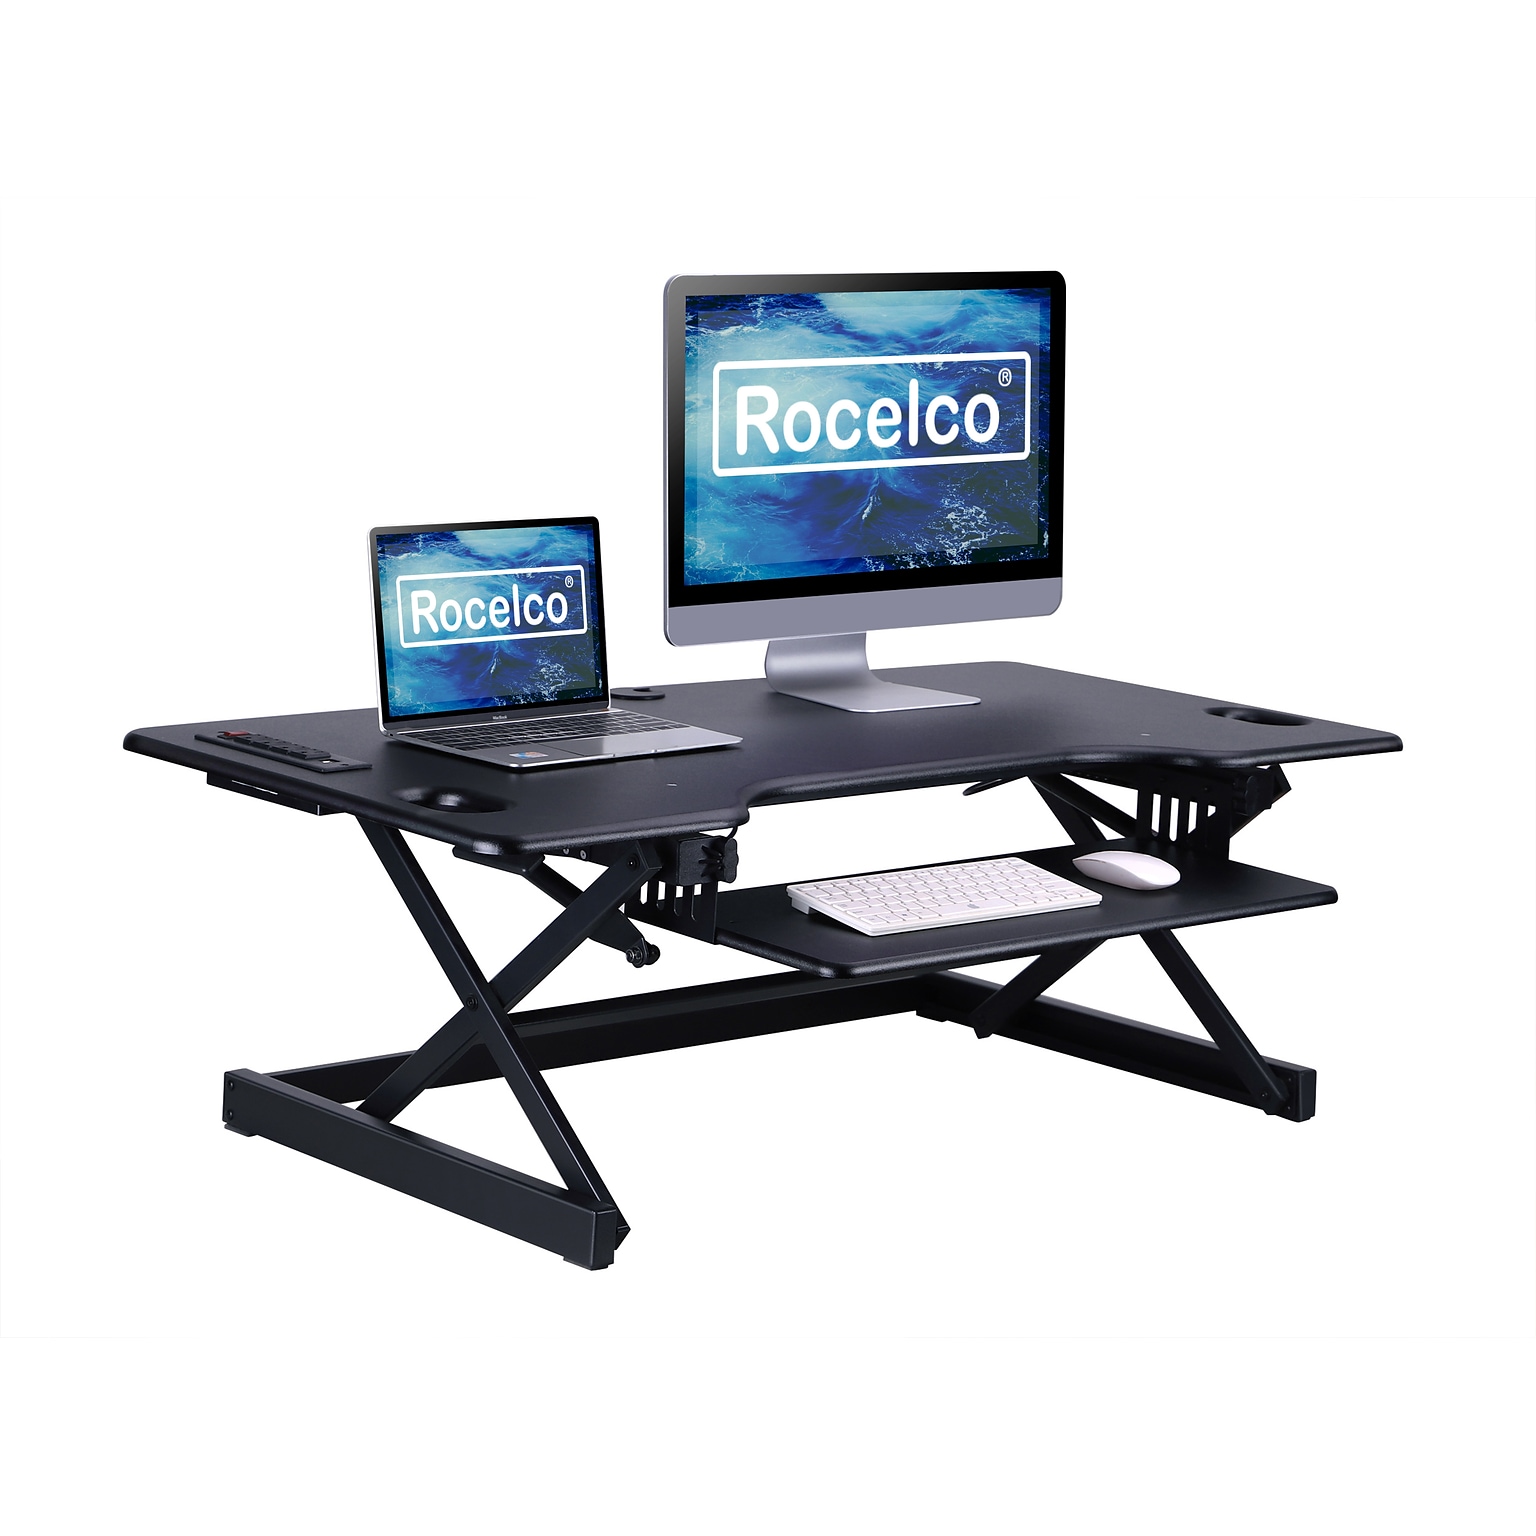 Rocelco 46W 5-20H Large Adjustable Standing Desk Converter with ACUSB Charger, Black (R DADRB-46-ACUSB)